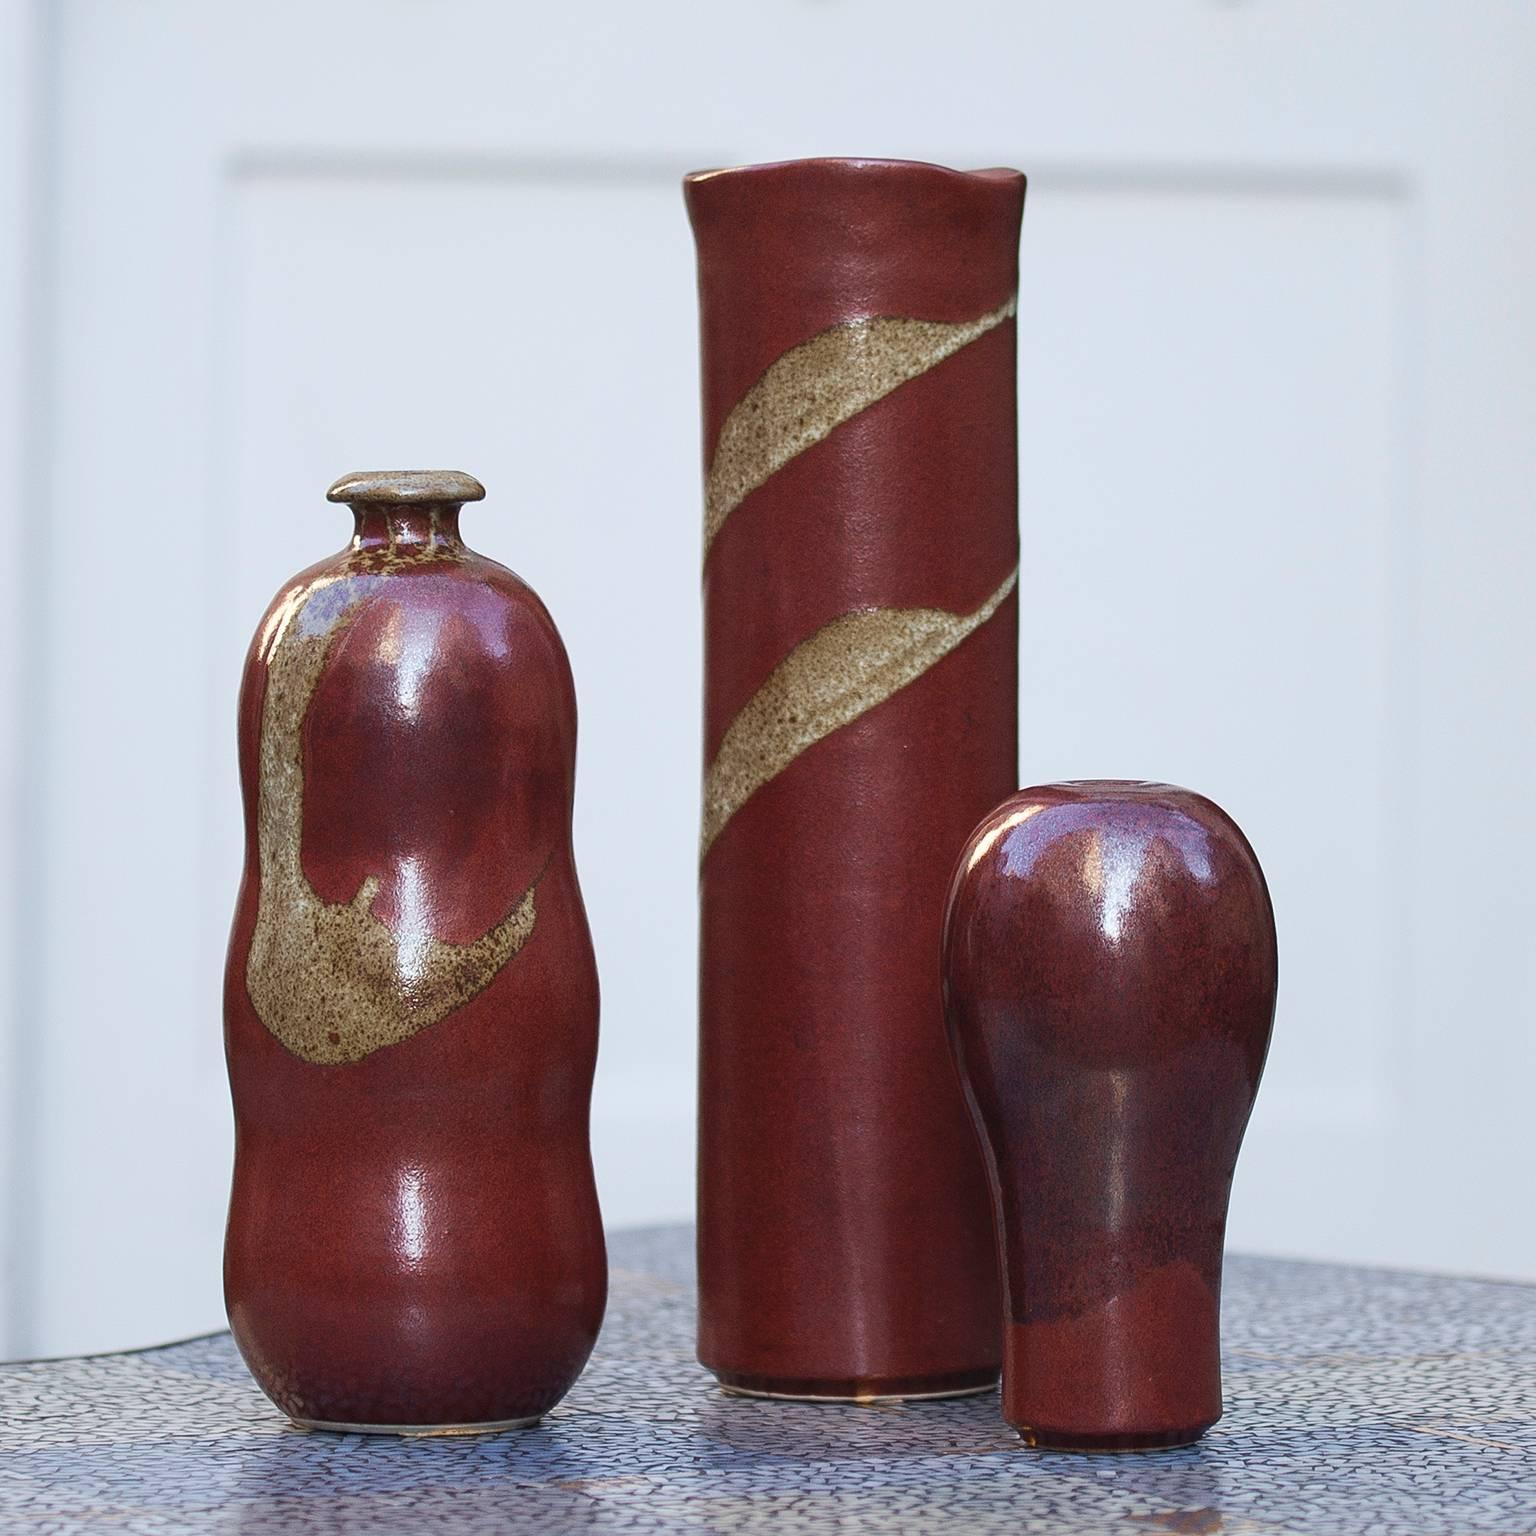 Beautiful set of Horst Kerstan ceramic in red and golden glazed ceramic from the 1970s. Horst Kerstan (1941-2005) made a crucial impact on post-1945 German ceramics. The artist, who is renowned at home and abroad, began his career with an